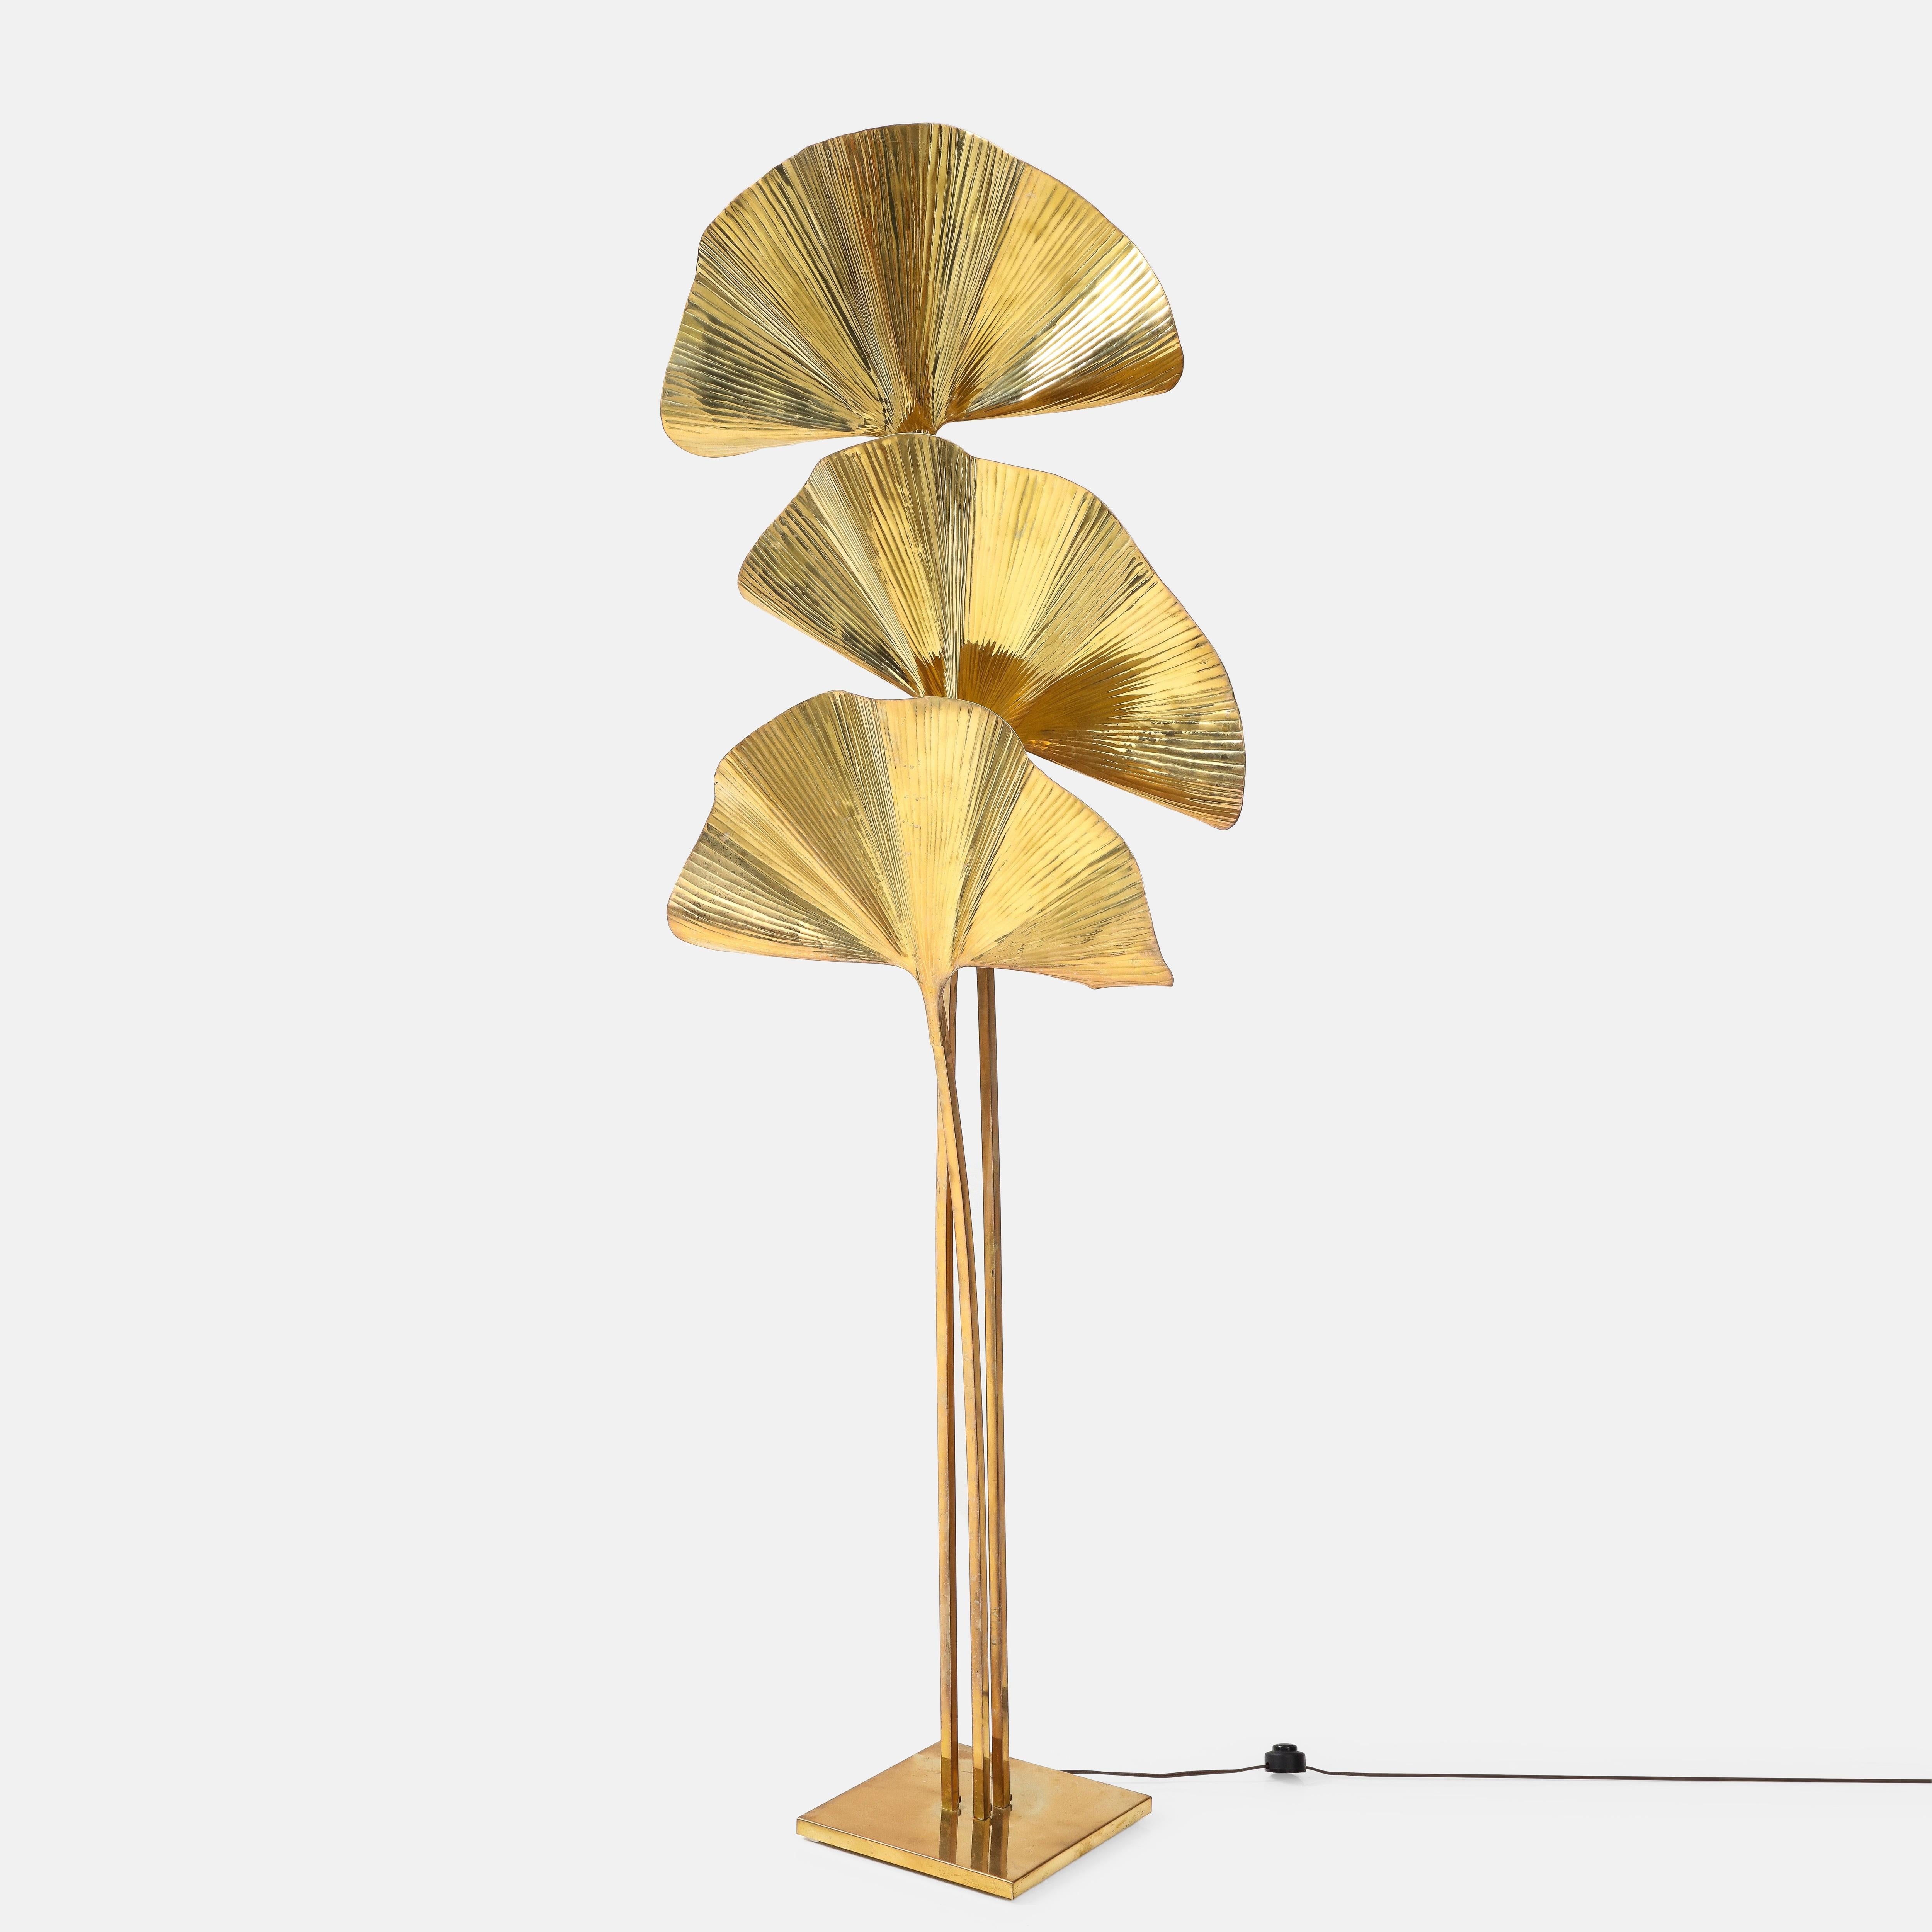 Carlo Giorgi for Bottega Gadda large and elegant patinated gilt brass three-leaf ginkgo floor lamp with undulating embossed leaves, handmade using repoussé and chasing techniques, mounted on stems attached to square base, Italy, 1970s. This floor